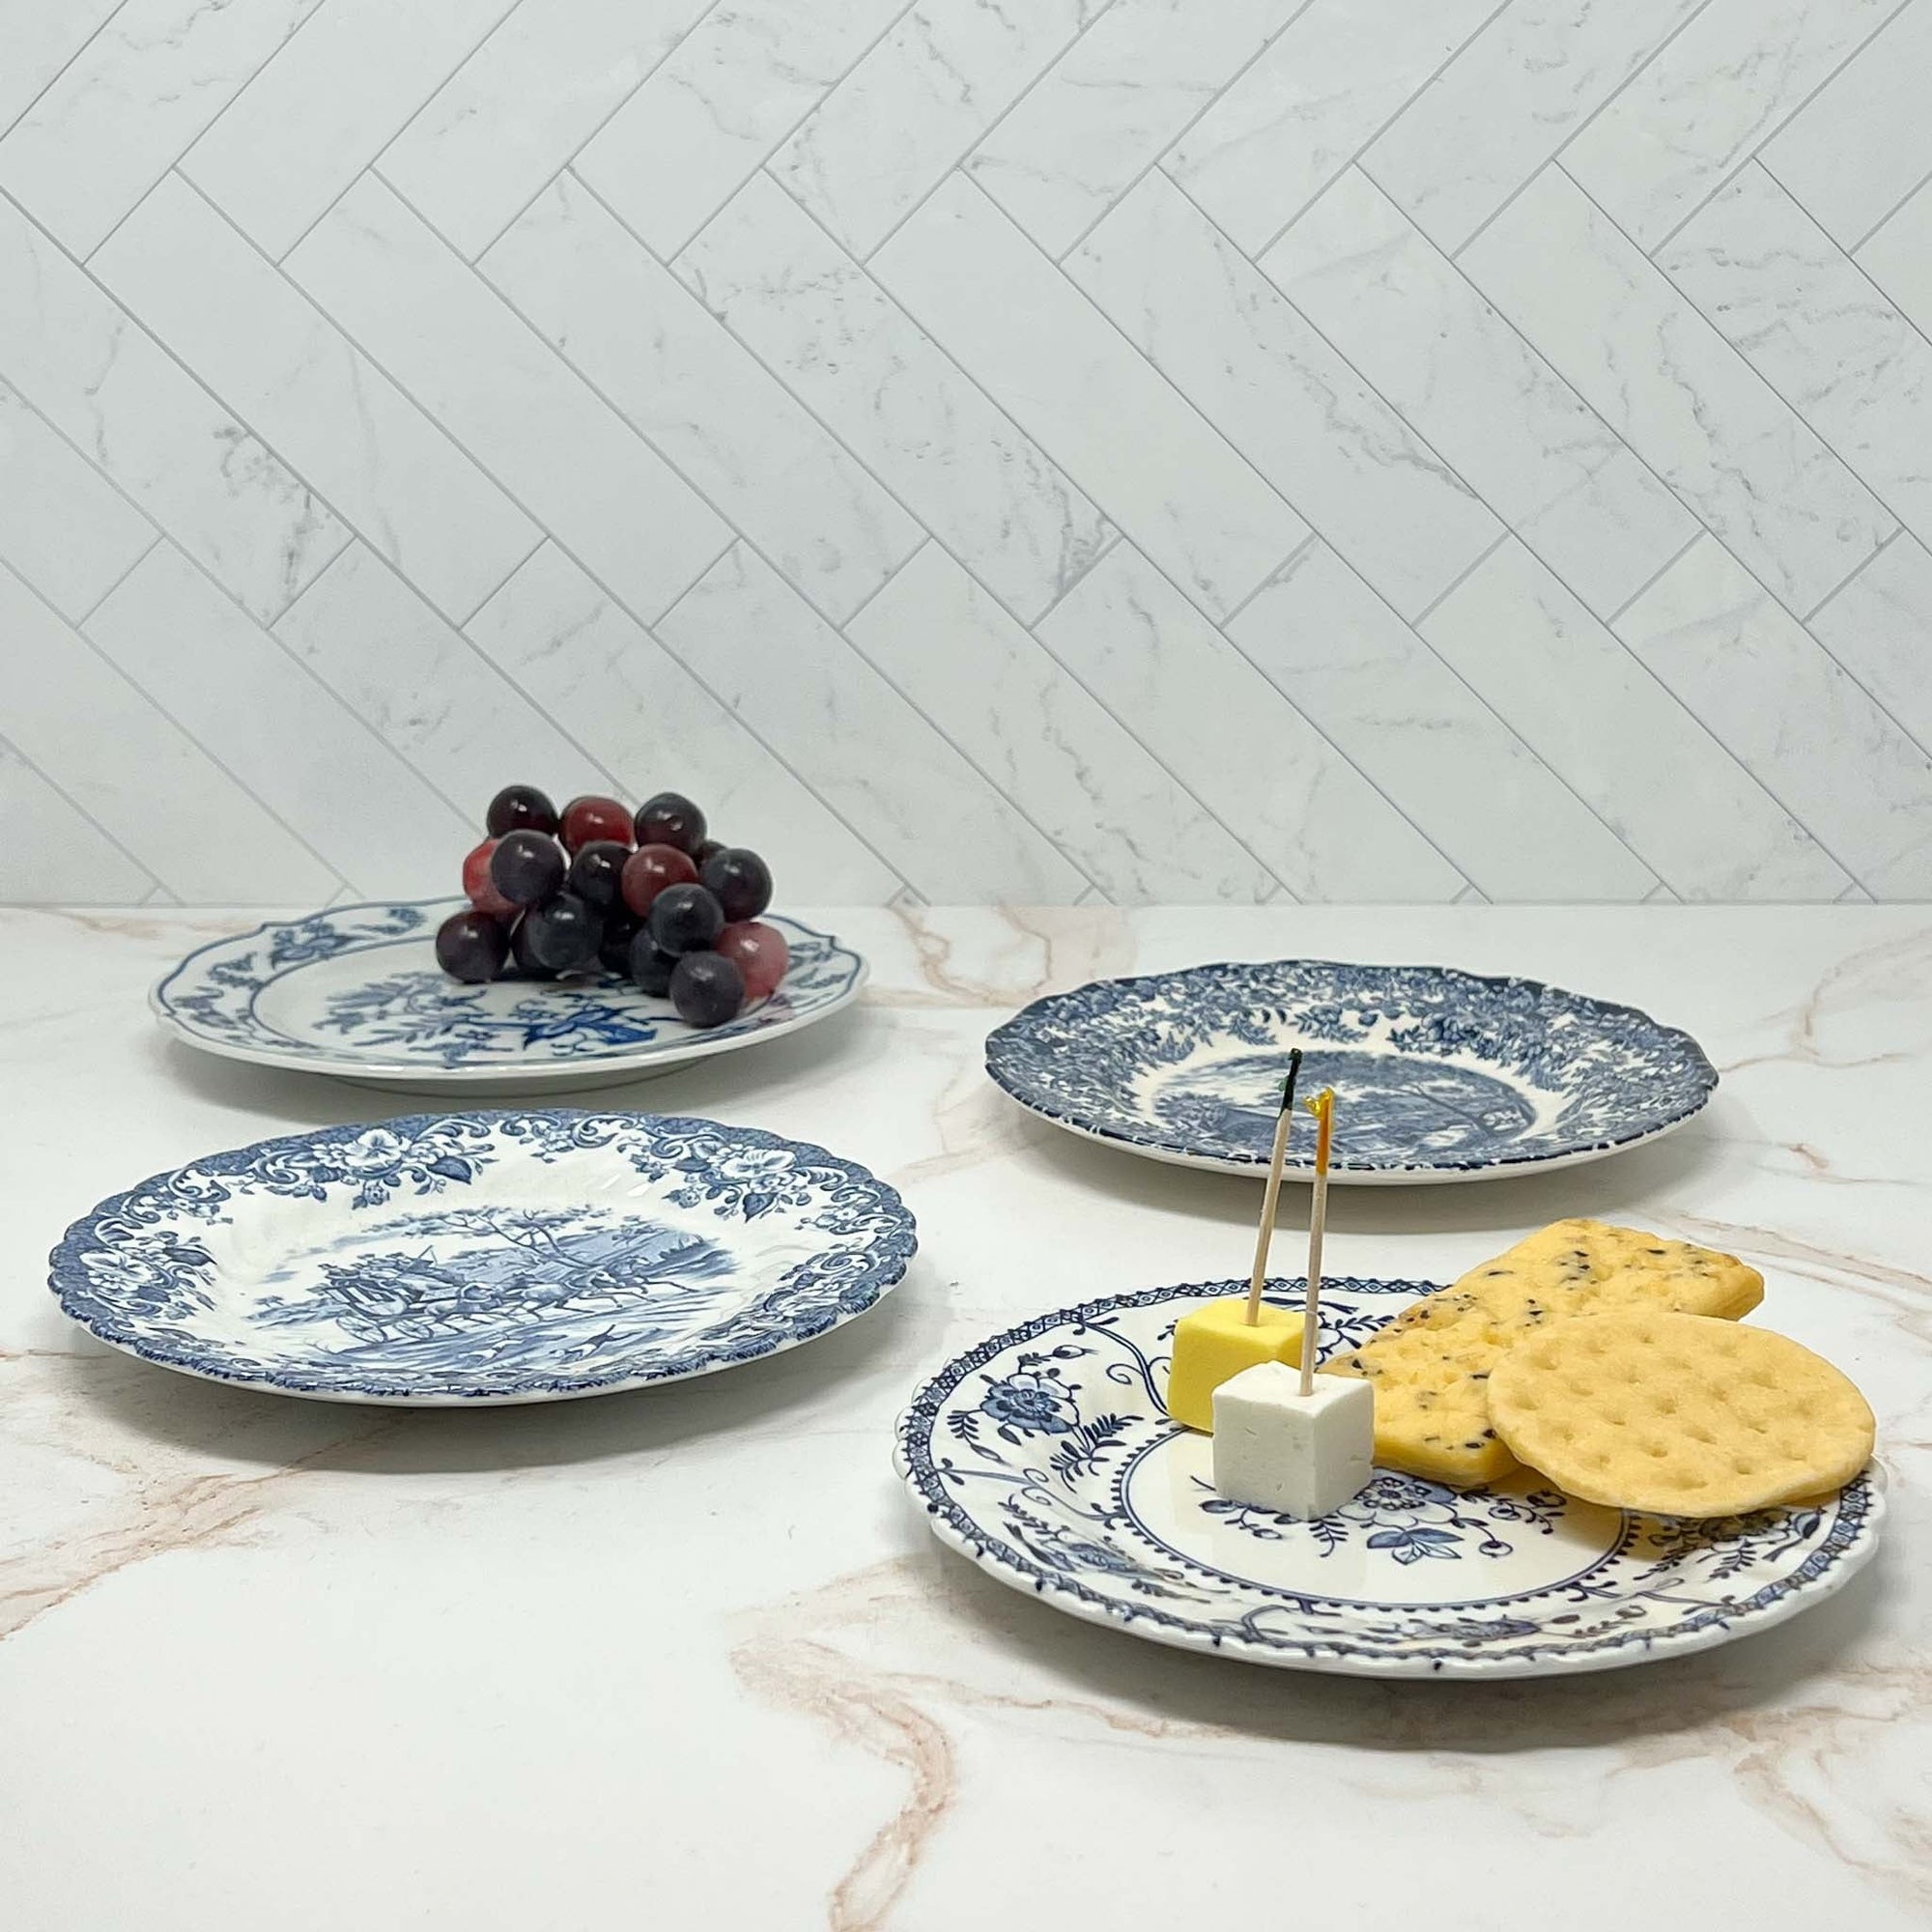 Gracious Bread &amp; Butter Plate Set | The Brooklyn Teacup - The Brooklyn Teacup